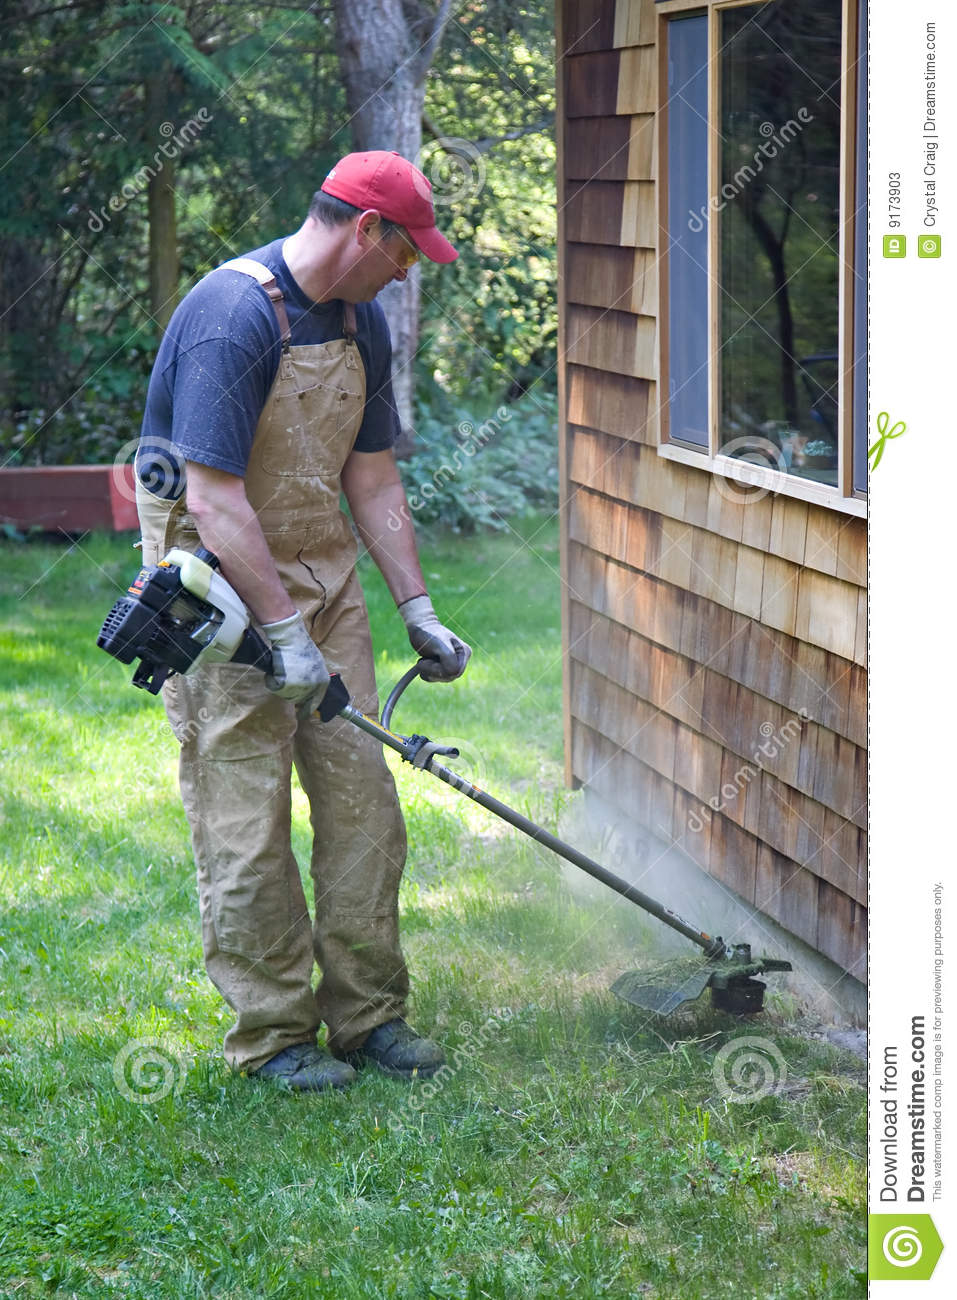 Man Using A Gas Powered Weed Eater To Trim The Lawn Edges Of A Yard